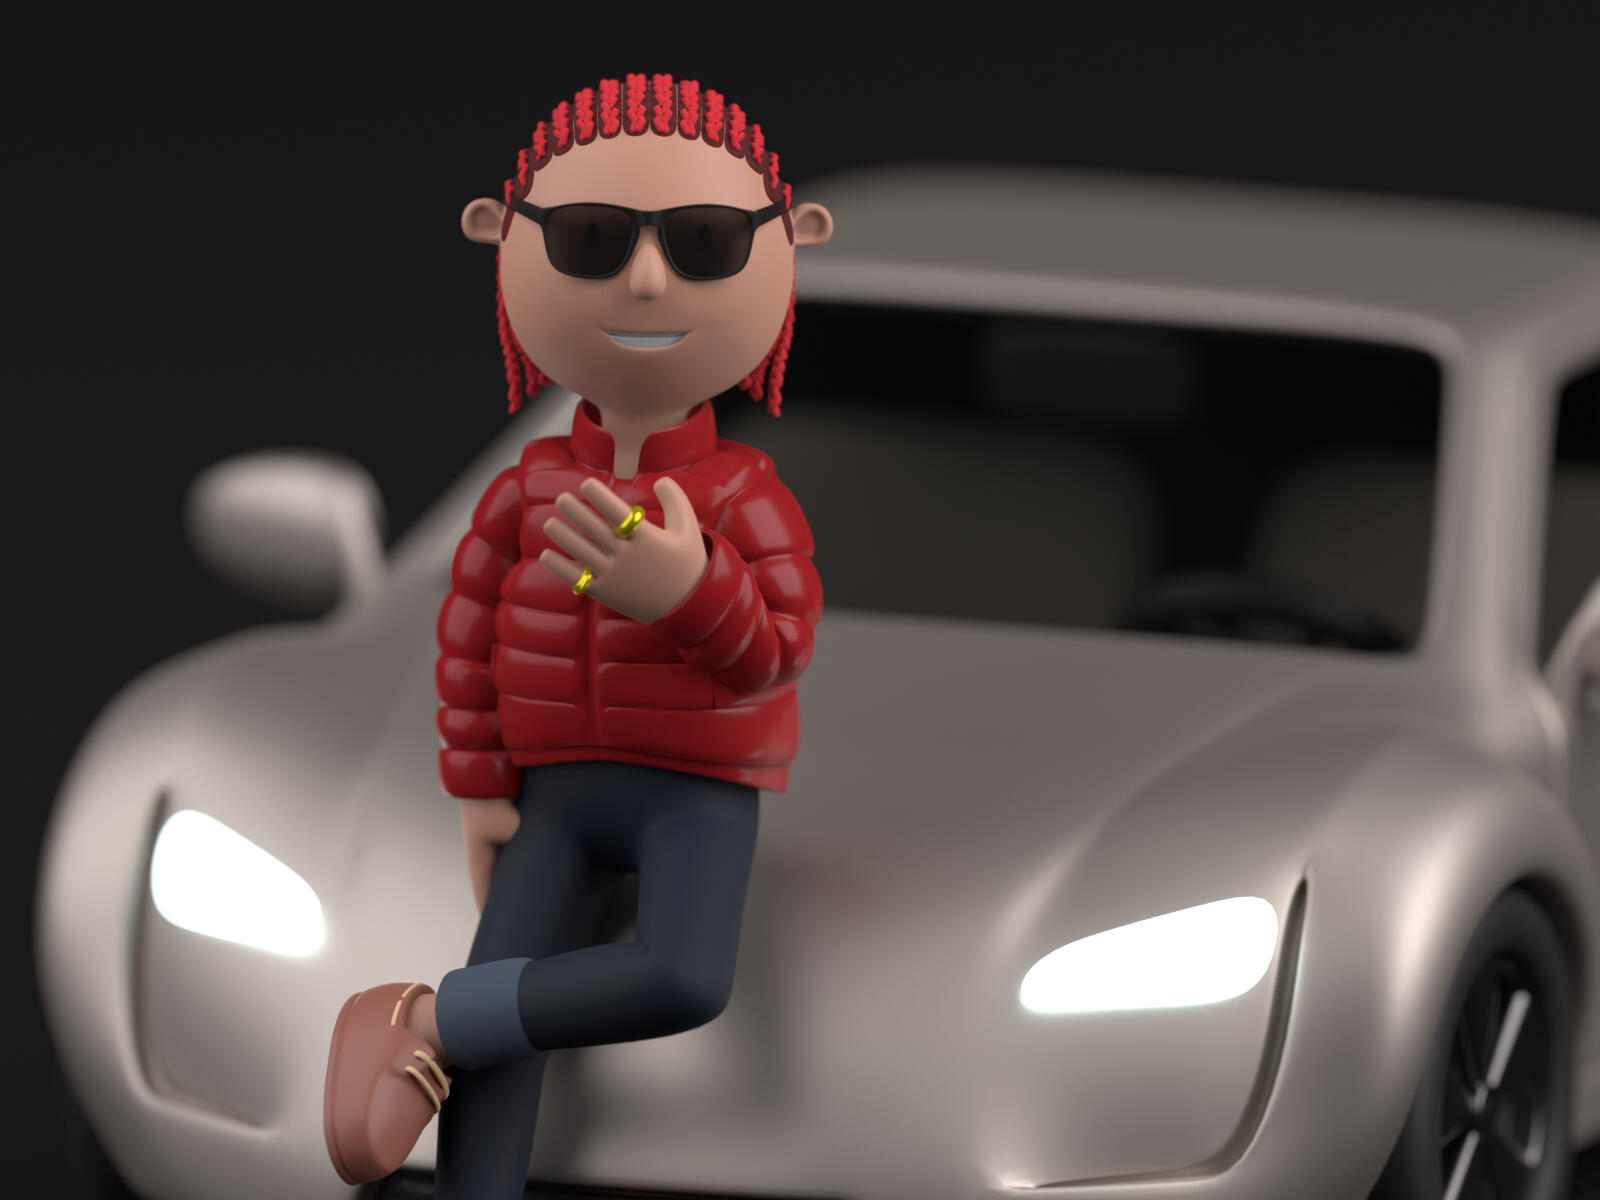 Showcase of 3D library of various 3D characters with 3D vehicles